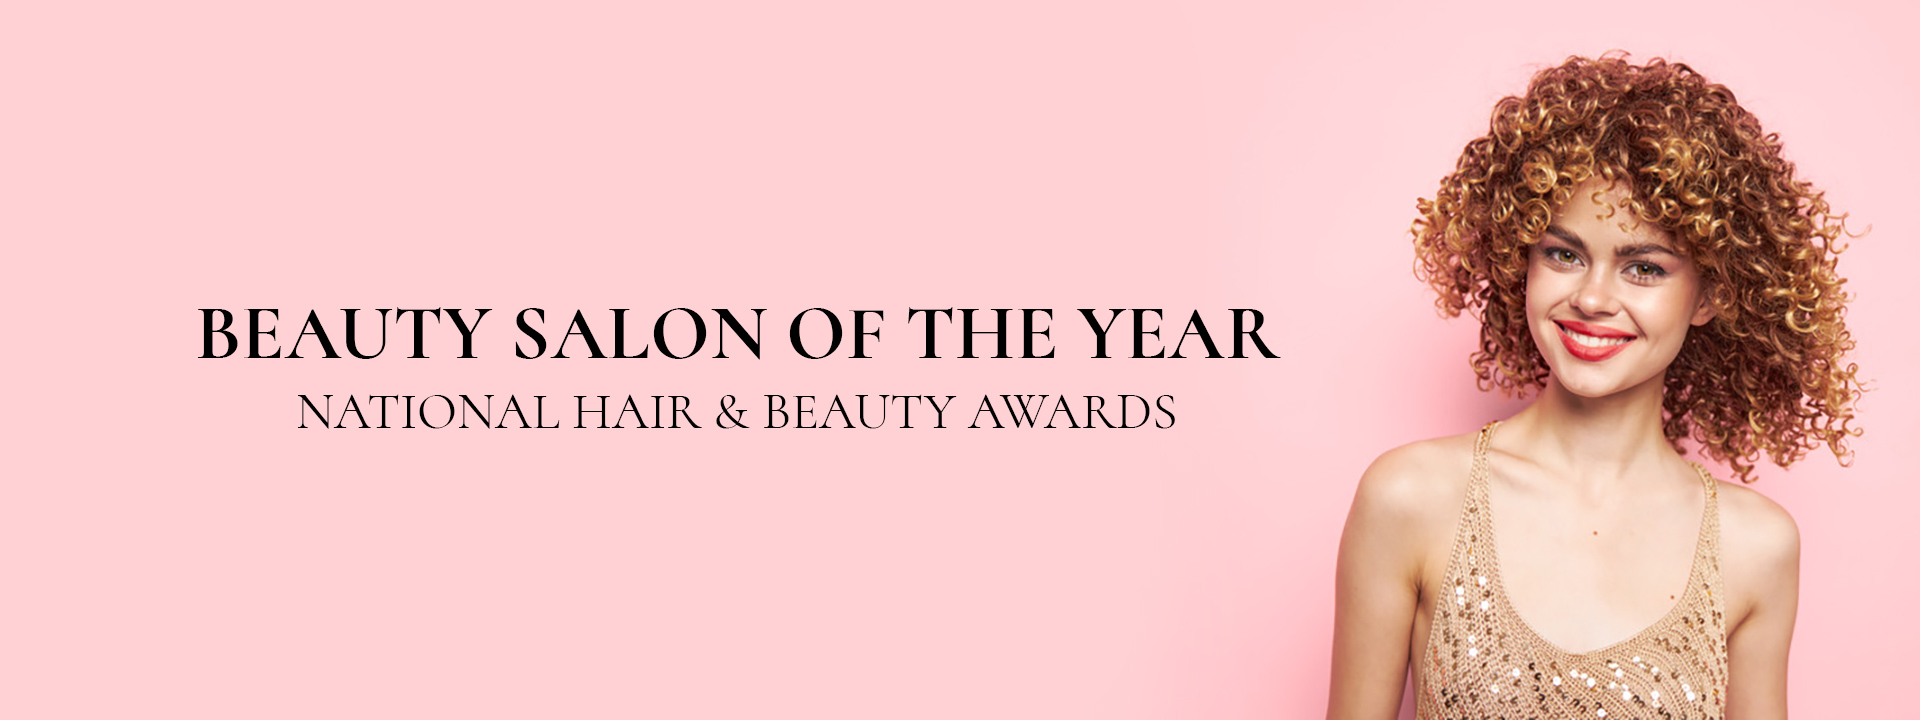 beauty salon of the year